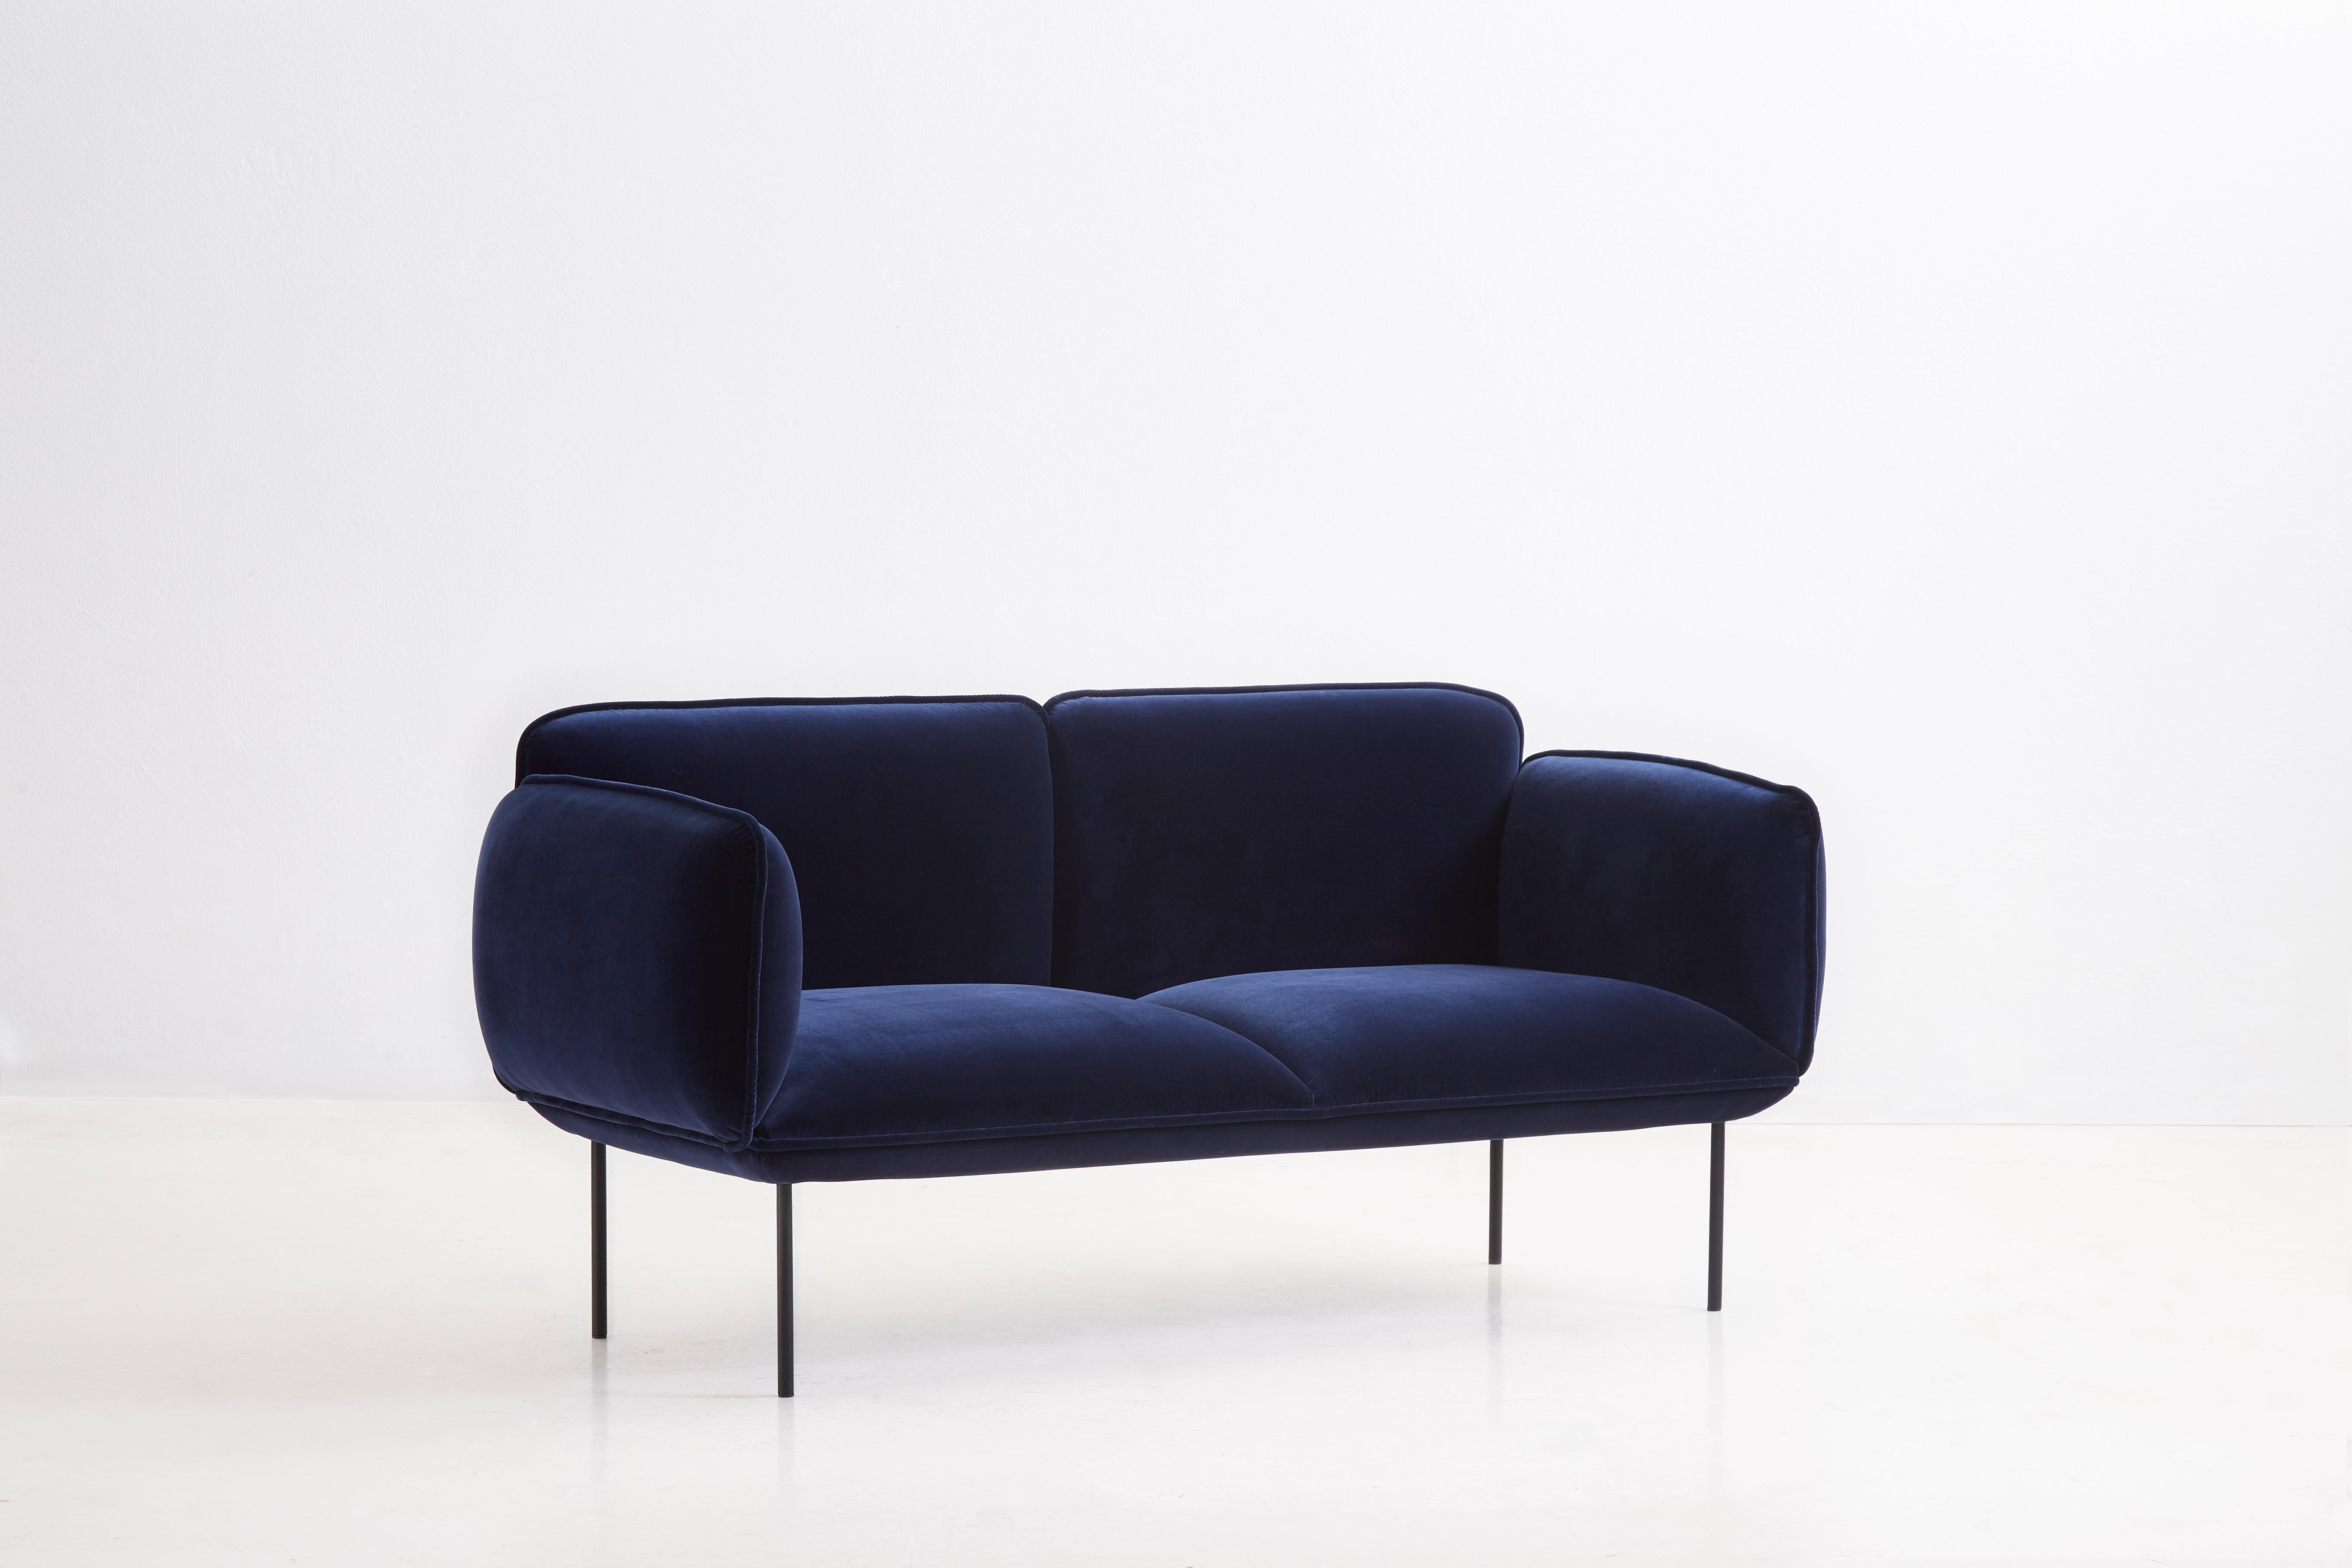 Nakki seater 2 by Mika Tolvanen
Materials: Foam, plywood, elastic belts, memory foam, fabric (Harald 3, 0182)
Dimensions: D 78 x W 180 x H 83 cm
Also available in different colours and materials.

The founders, Mia and Torben Koed, decided to